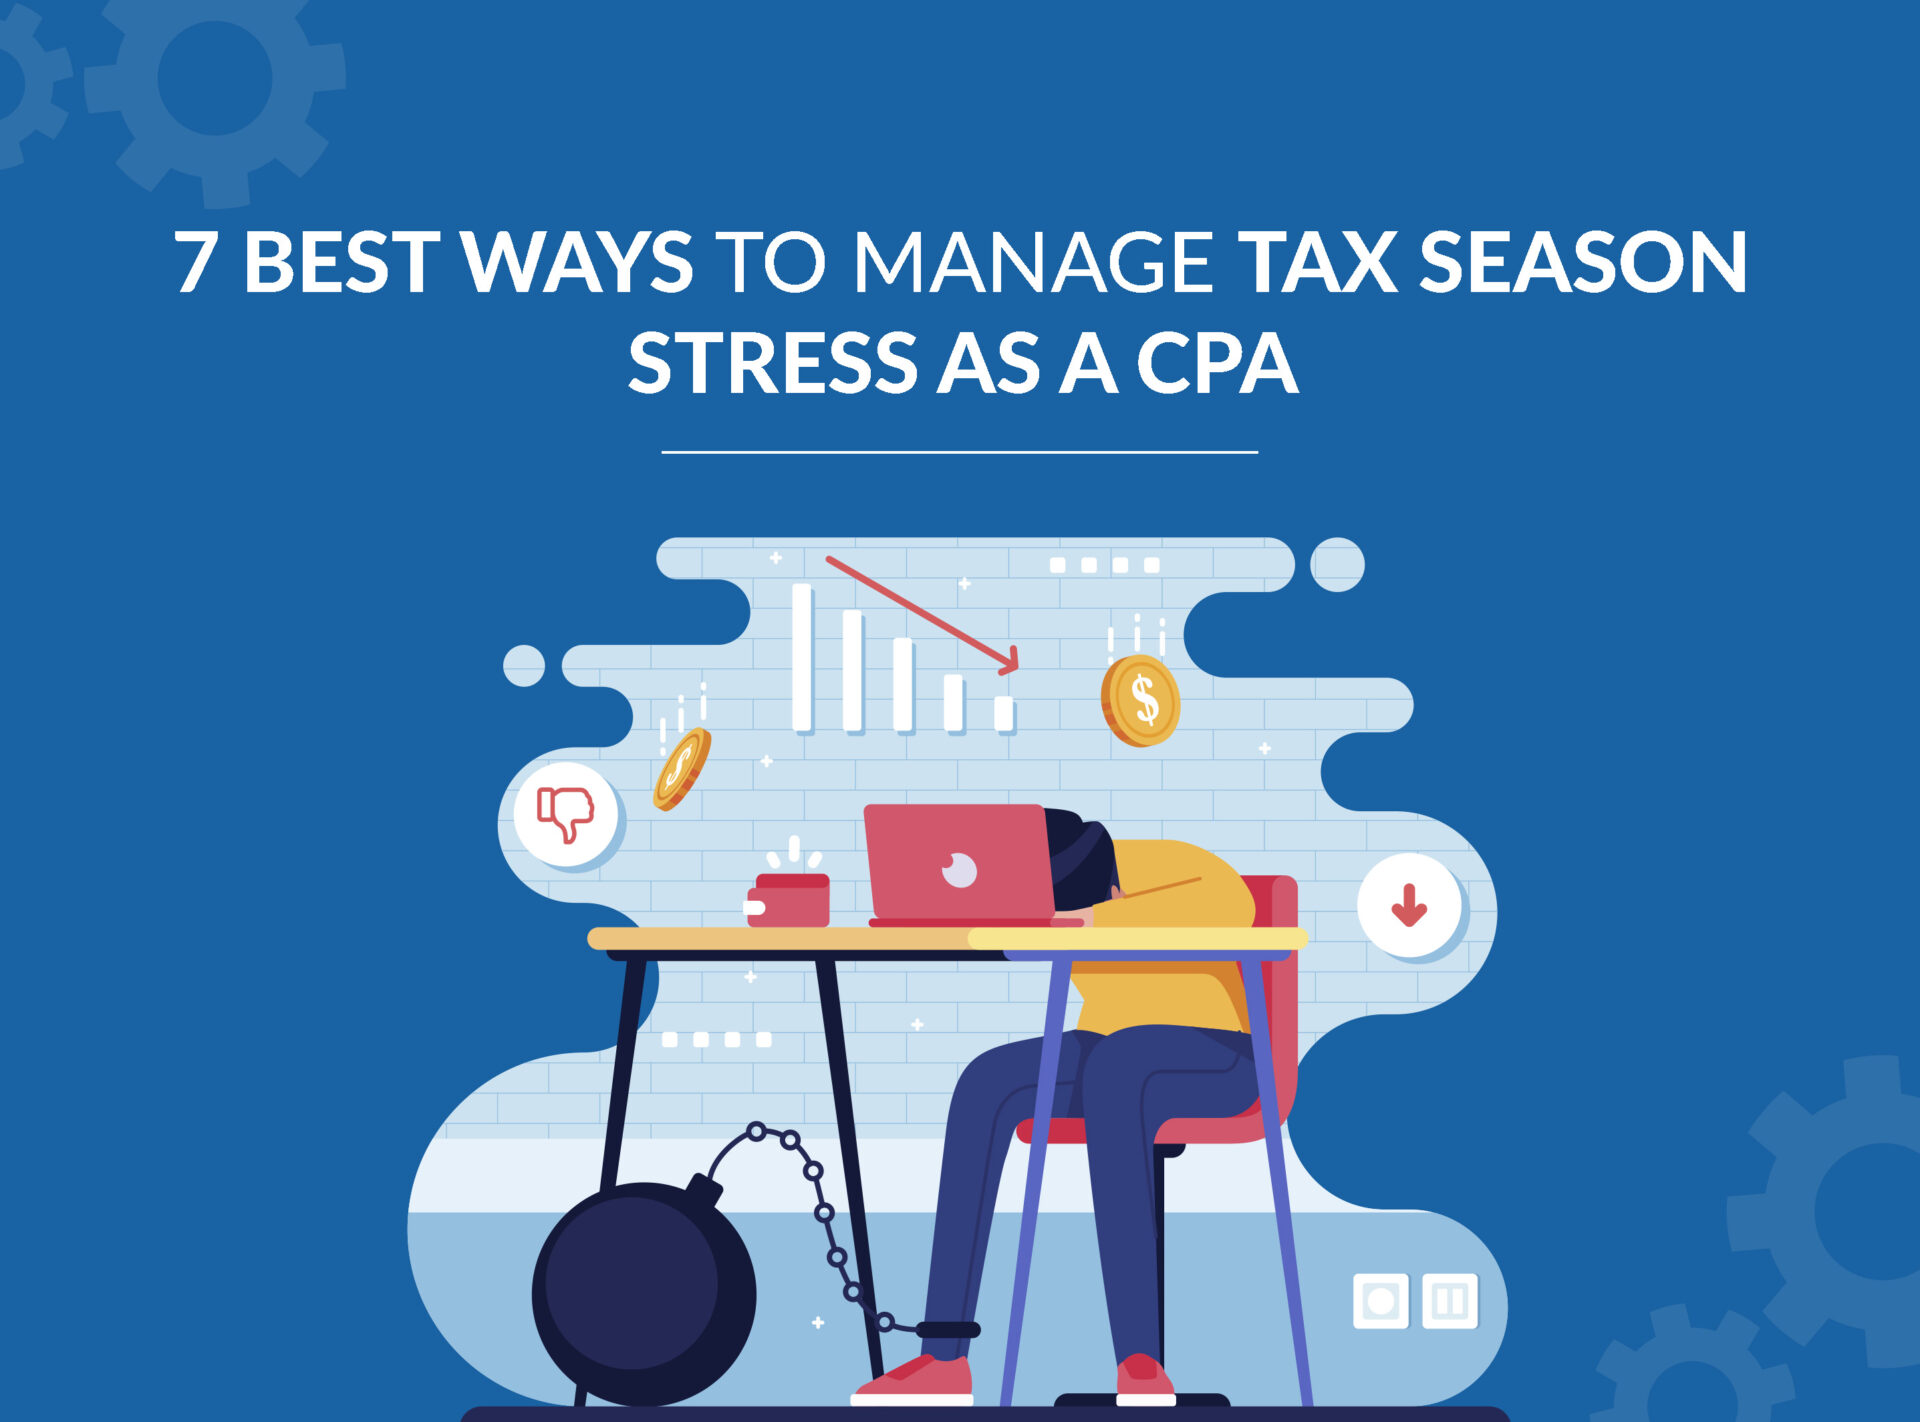 7 Tips to Manage Tax Season Stress as a CPA